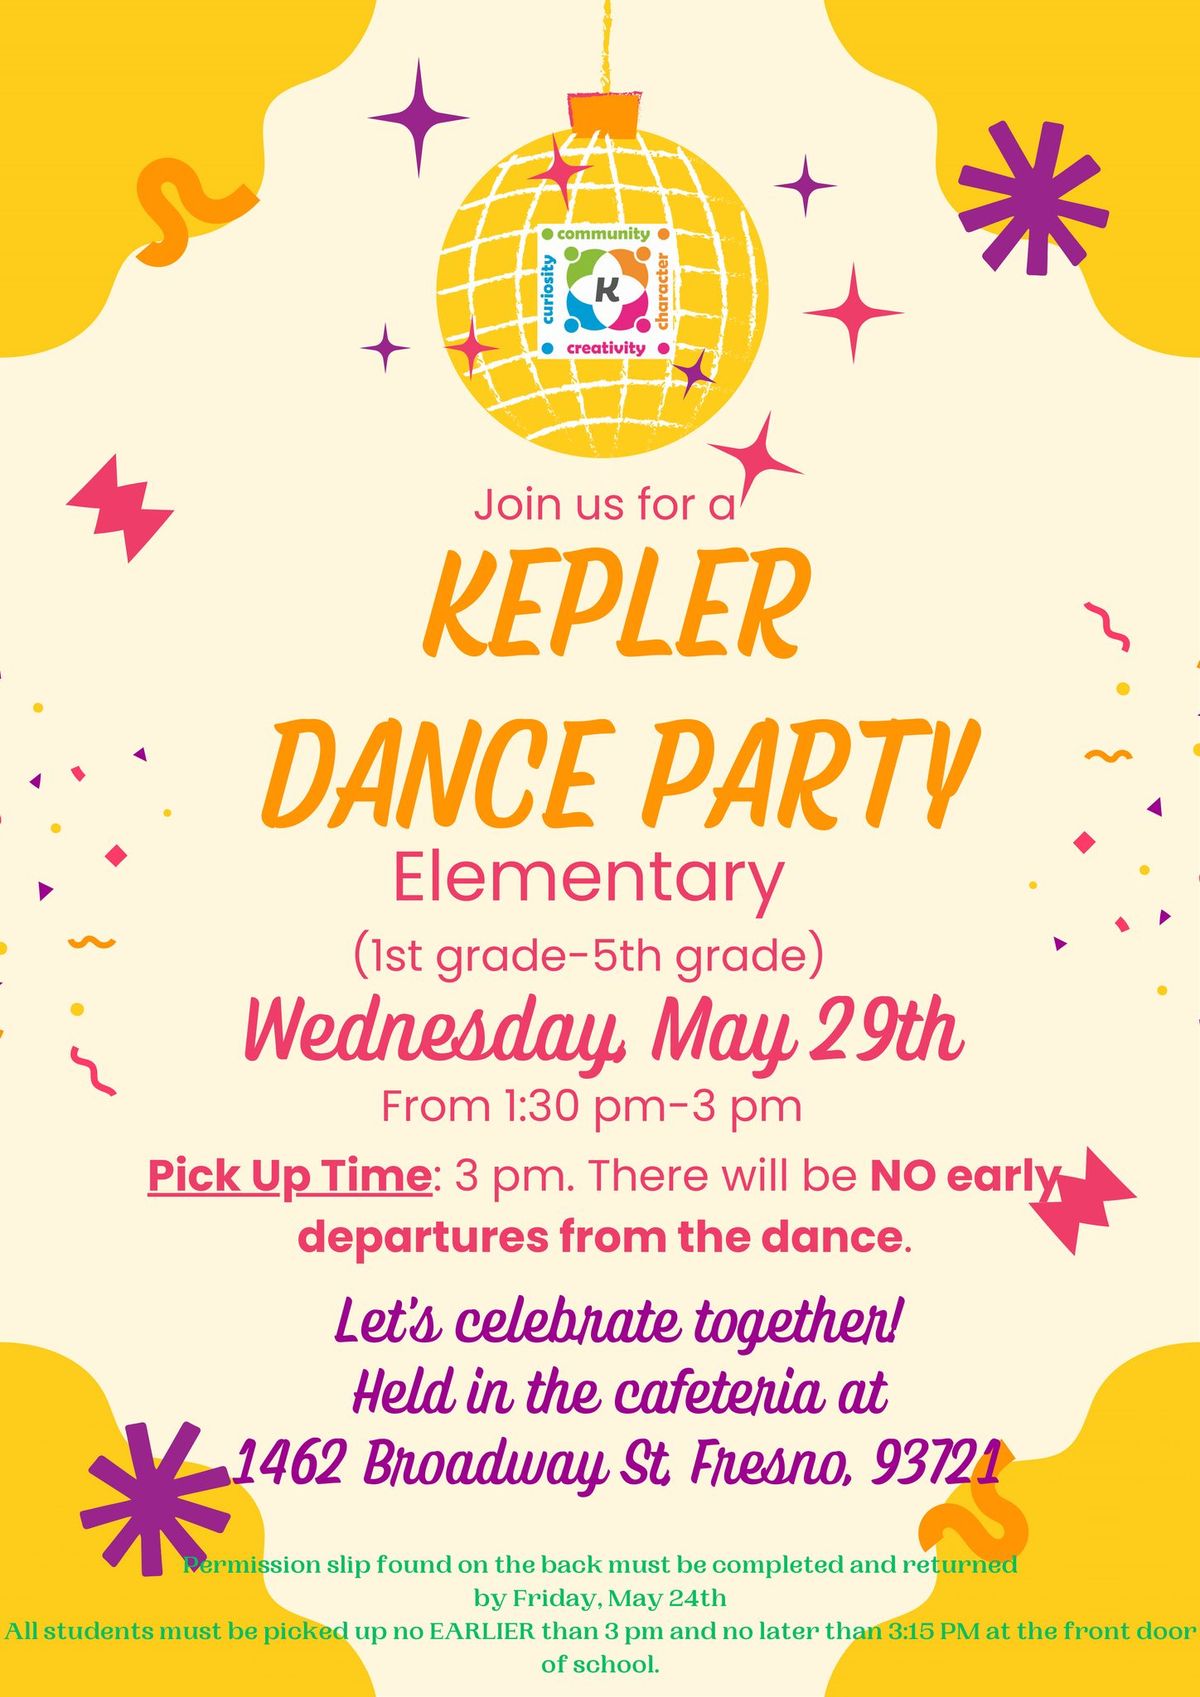 Elementary Dance Party